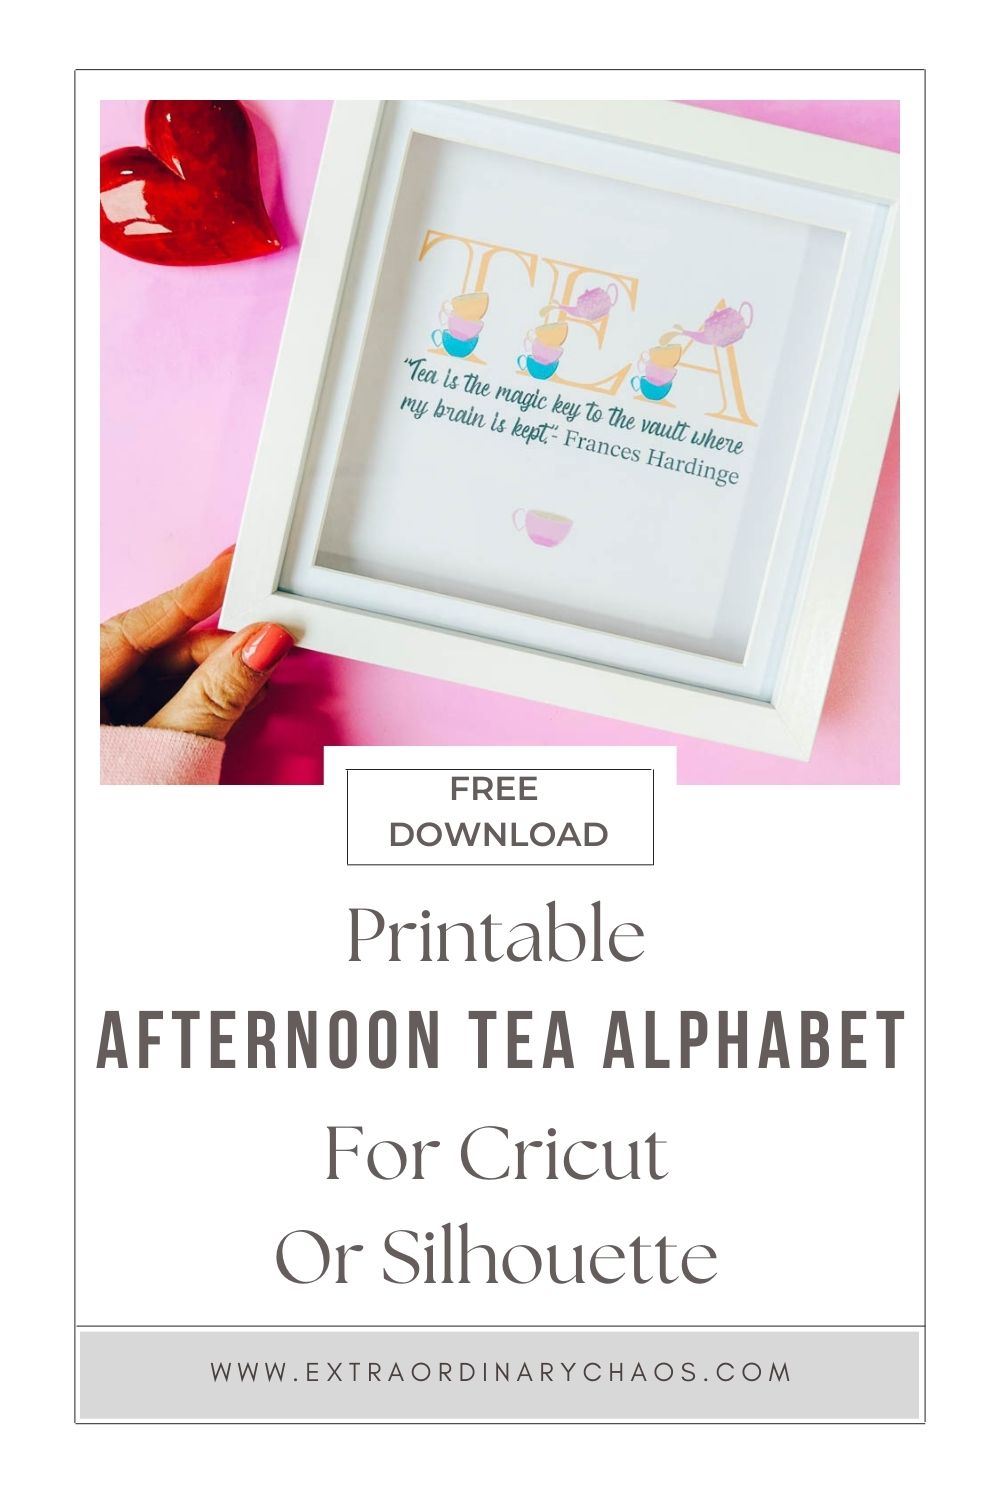 Free printable afternoon tea alphabet, jpg, png for Cricut or Silhouette -2